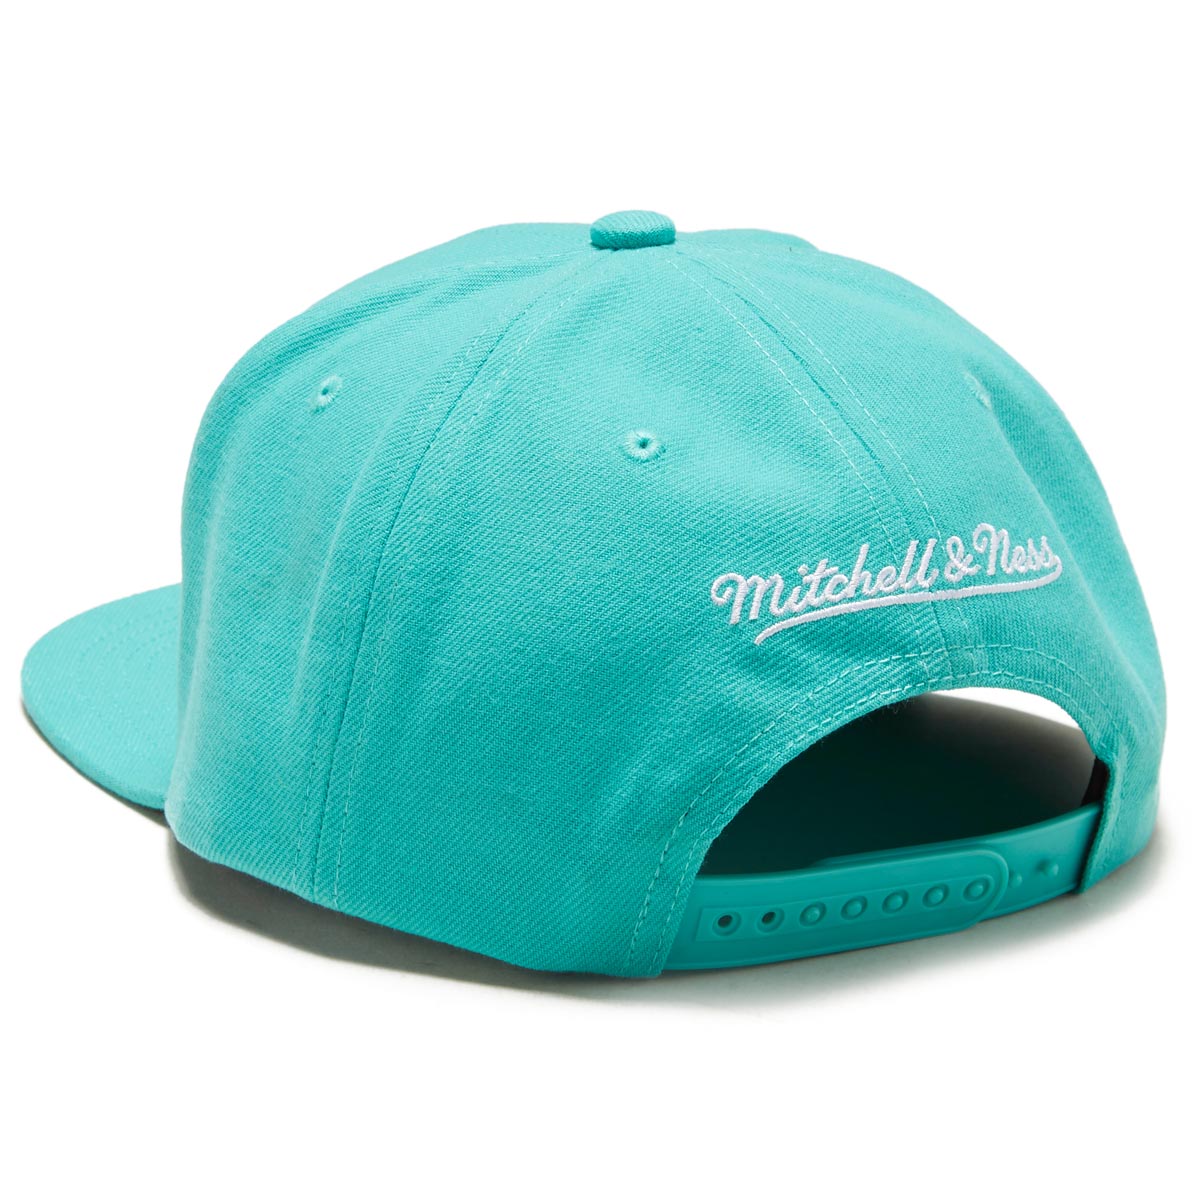 Mitchell & Ness x NBA Champ Stack Snapback Spurs Hat - Teal image 2